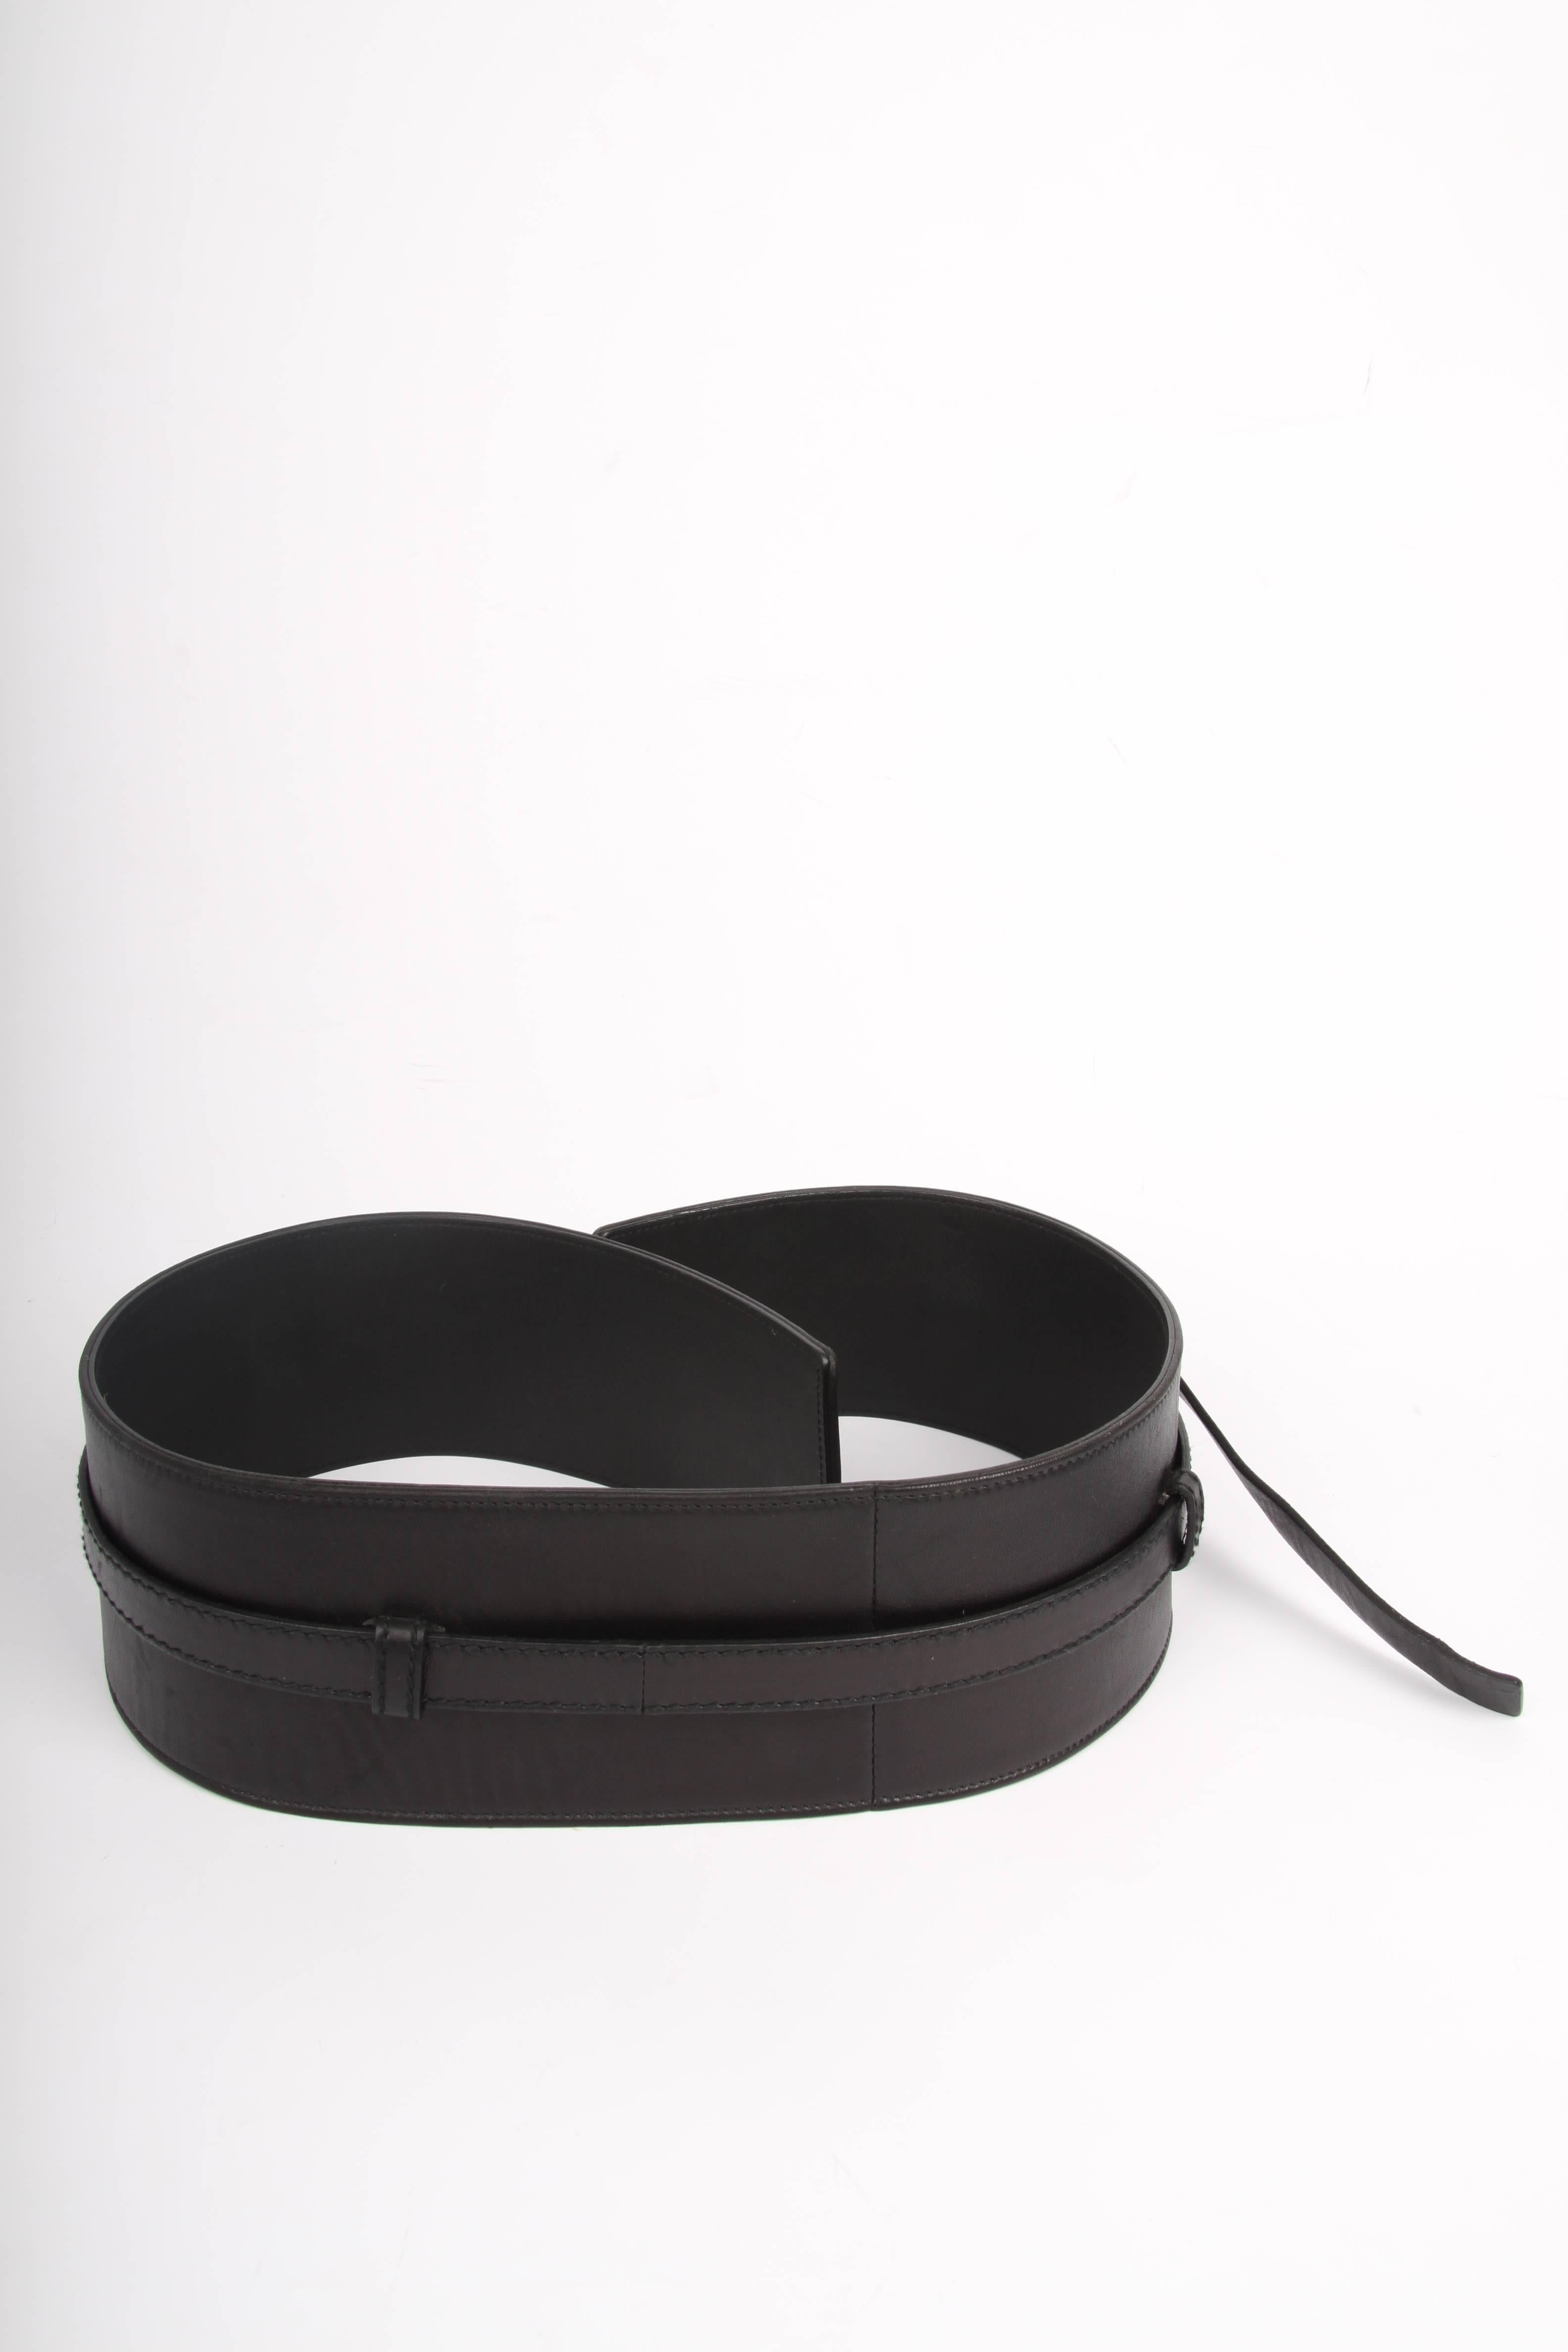 Beautiful belt by Yves Saint Laurent made of black leather.

This belt measures 95 centimeters and is 9 centimeters wide. A very special closure with something that looks like a black cow horn. Silver-tone hardware.

In perfect condition,